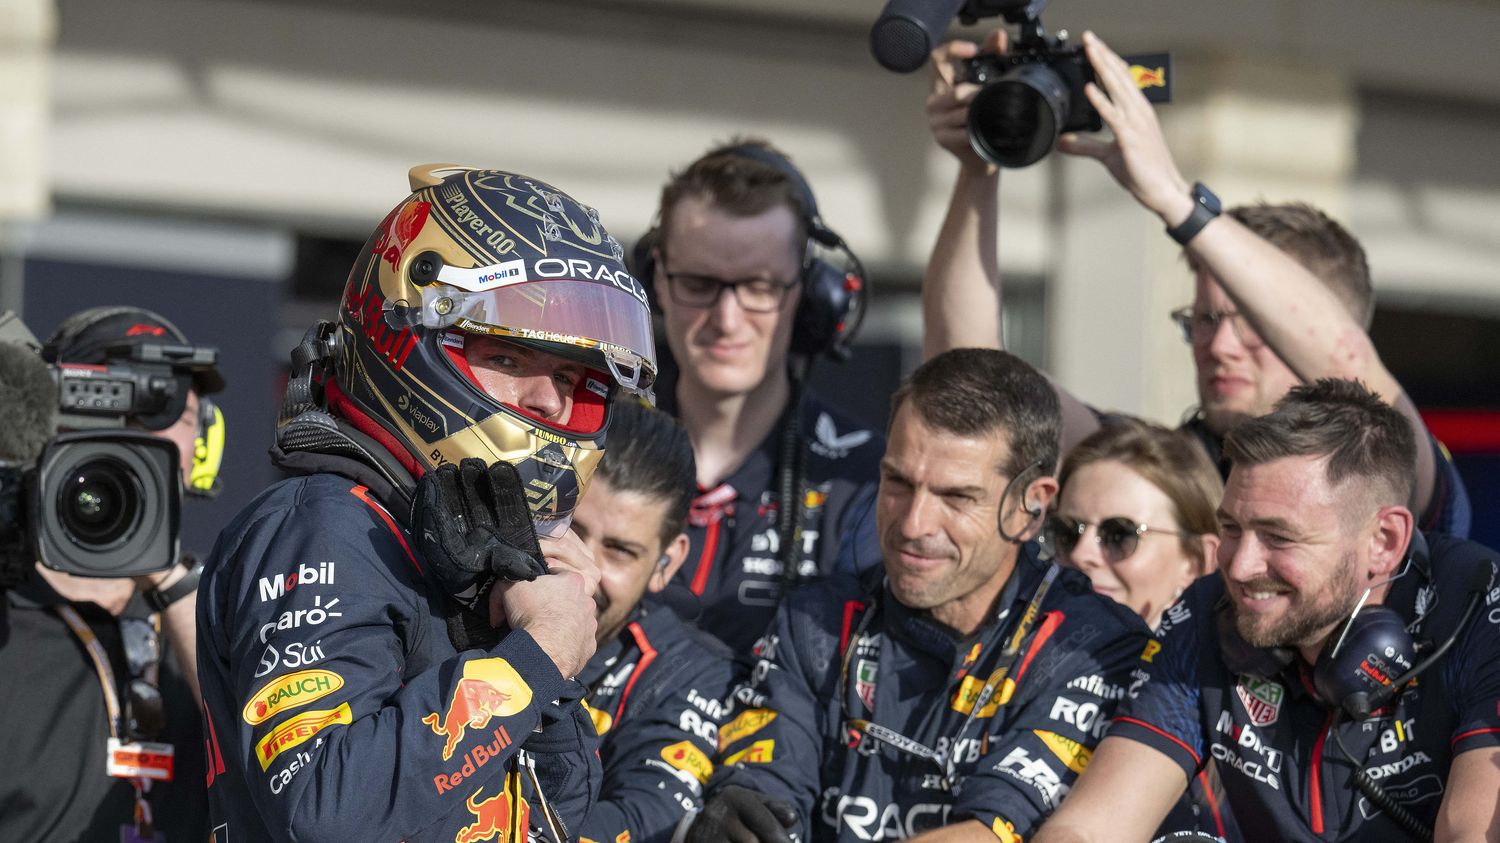 F1: unstoppable, Max Verstappen flies through the sprint race of the United States Grand Prix